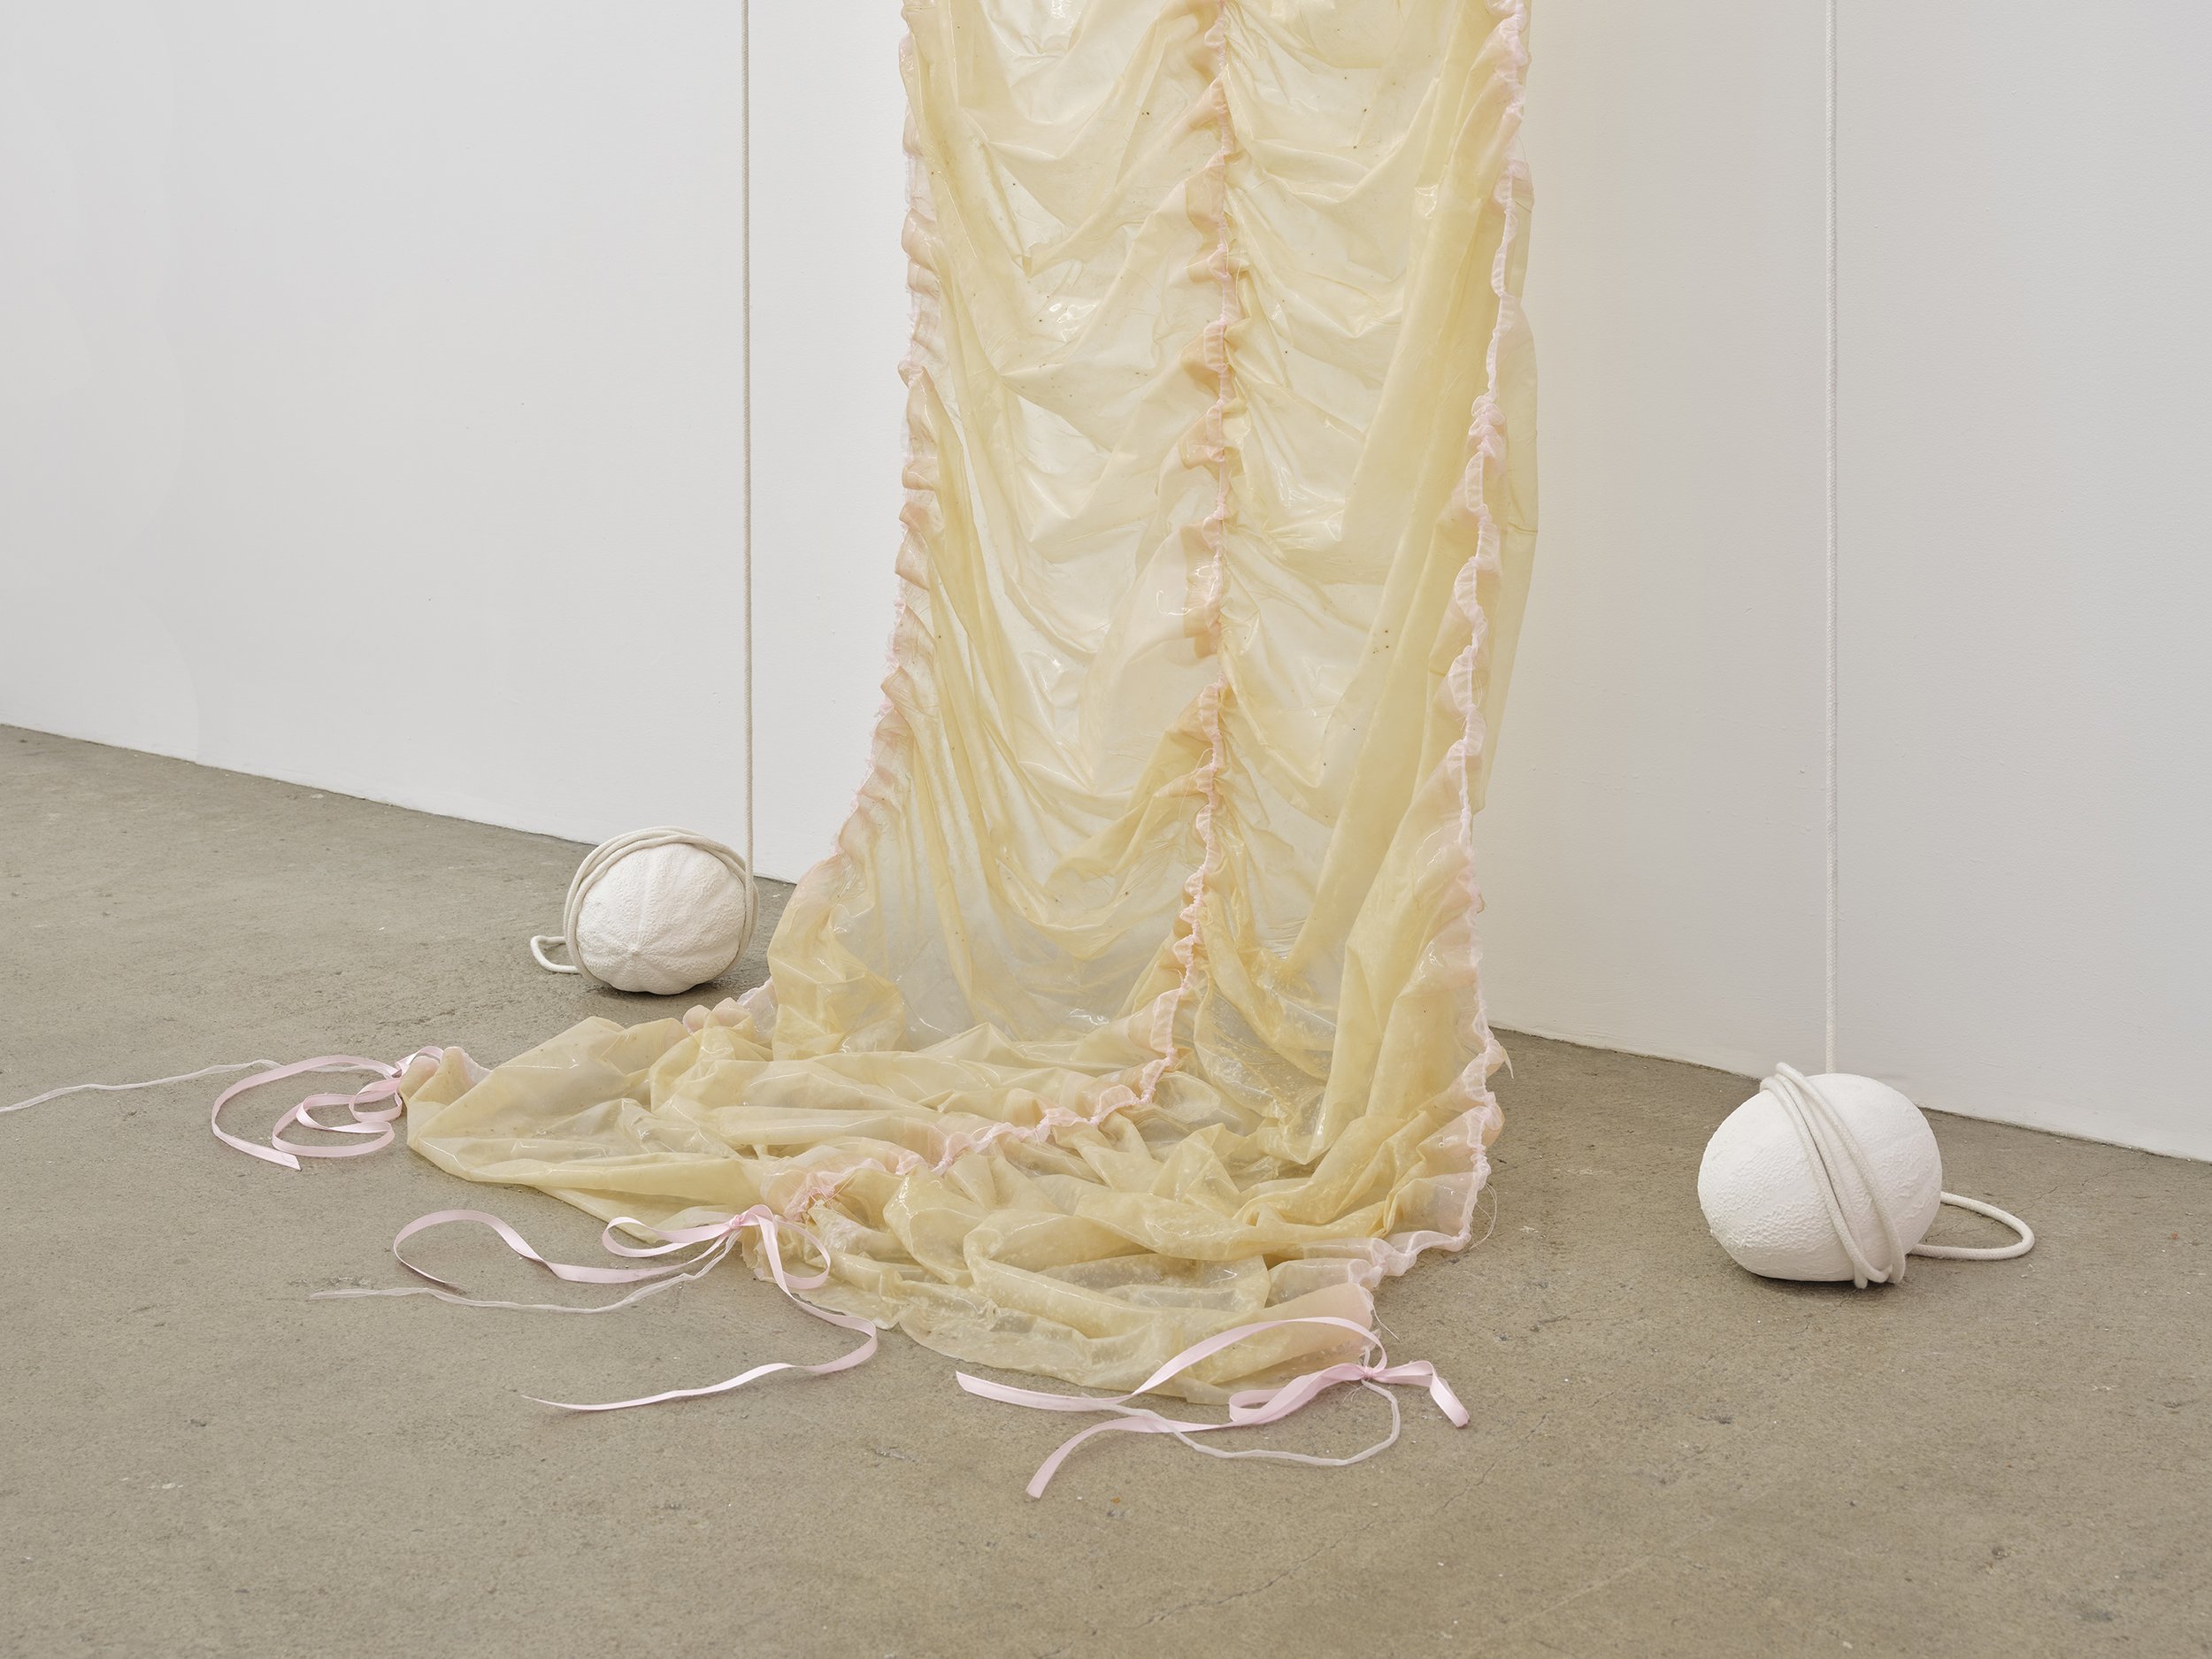  Karinne Smith  Untitled (piece of Pinkie II) , 2021 (detail) collagen dyed with soda, silicone, baby powder, ribbon,  scrotum clamps, cotton rope, cast plaster melons 124 x 52 x 36 inches (310 x 132 x 91 cm) (KS1) 